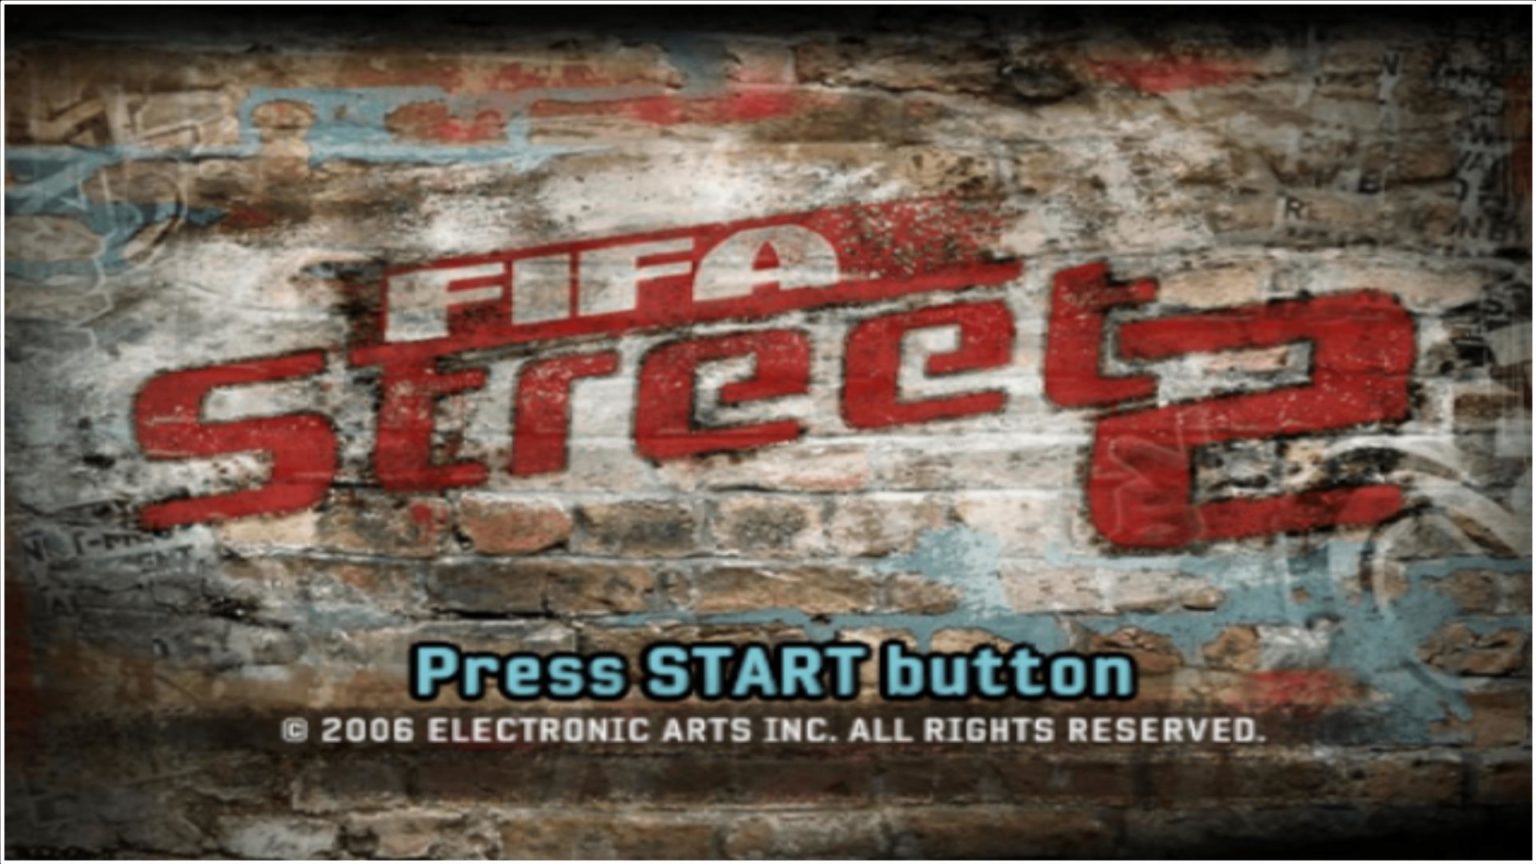 FIFA Street 2 PSP ISO File Highly Compressed (192mb) Free Game 1